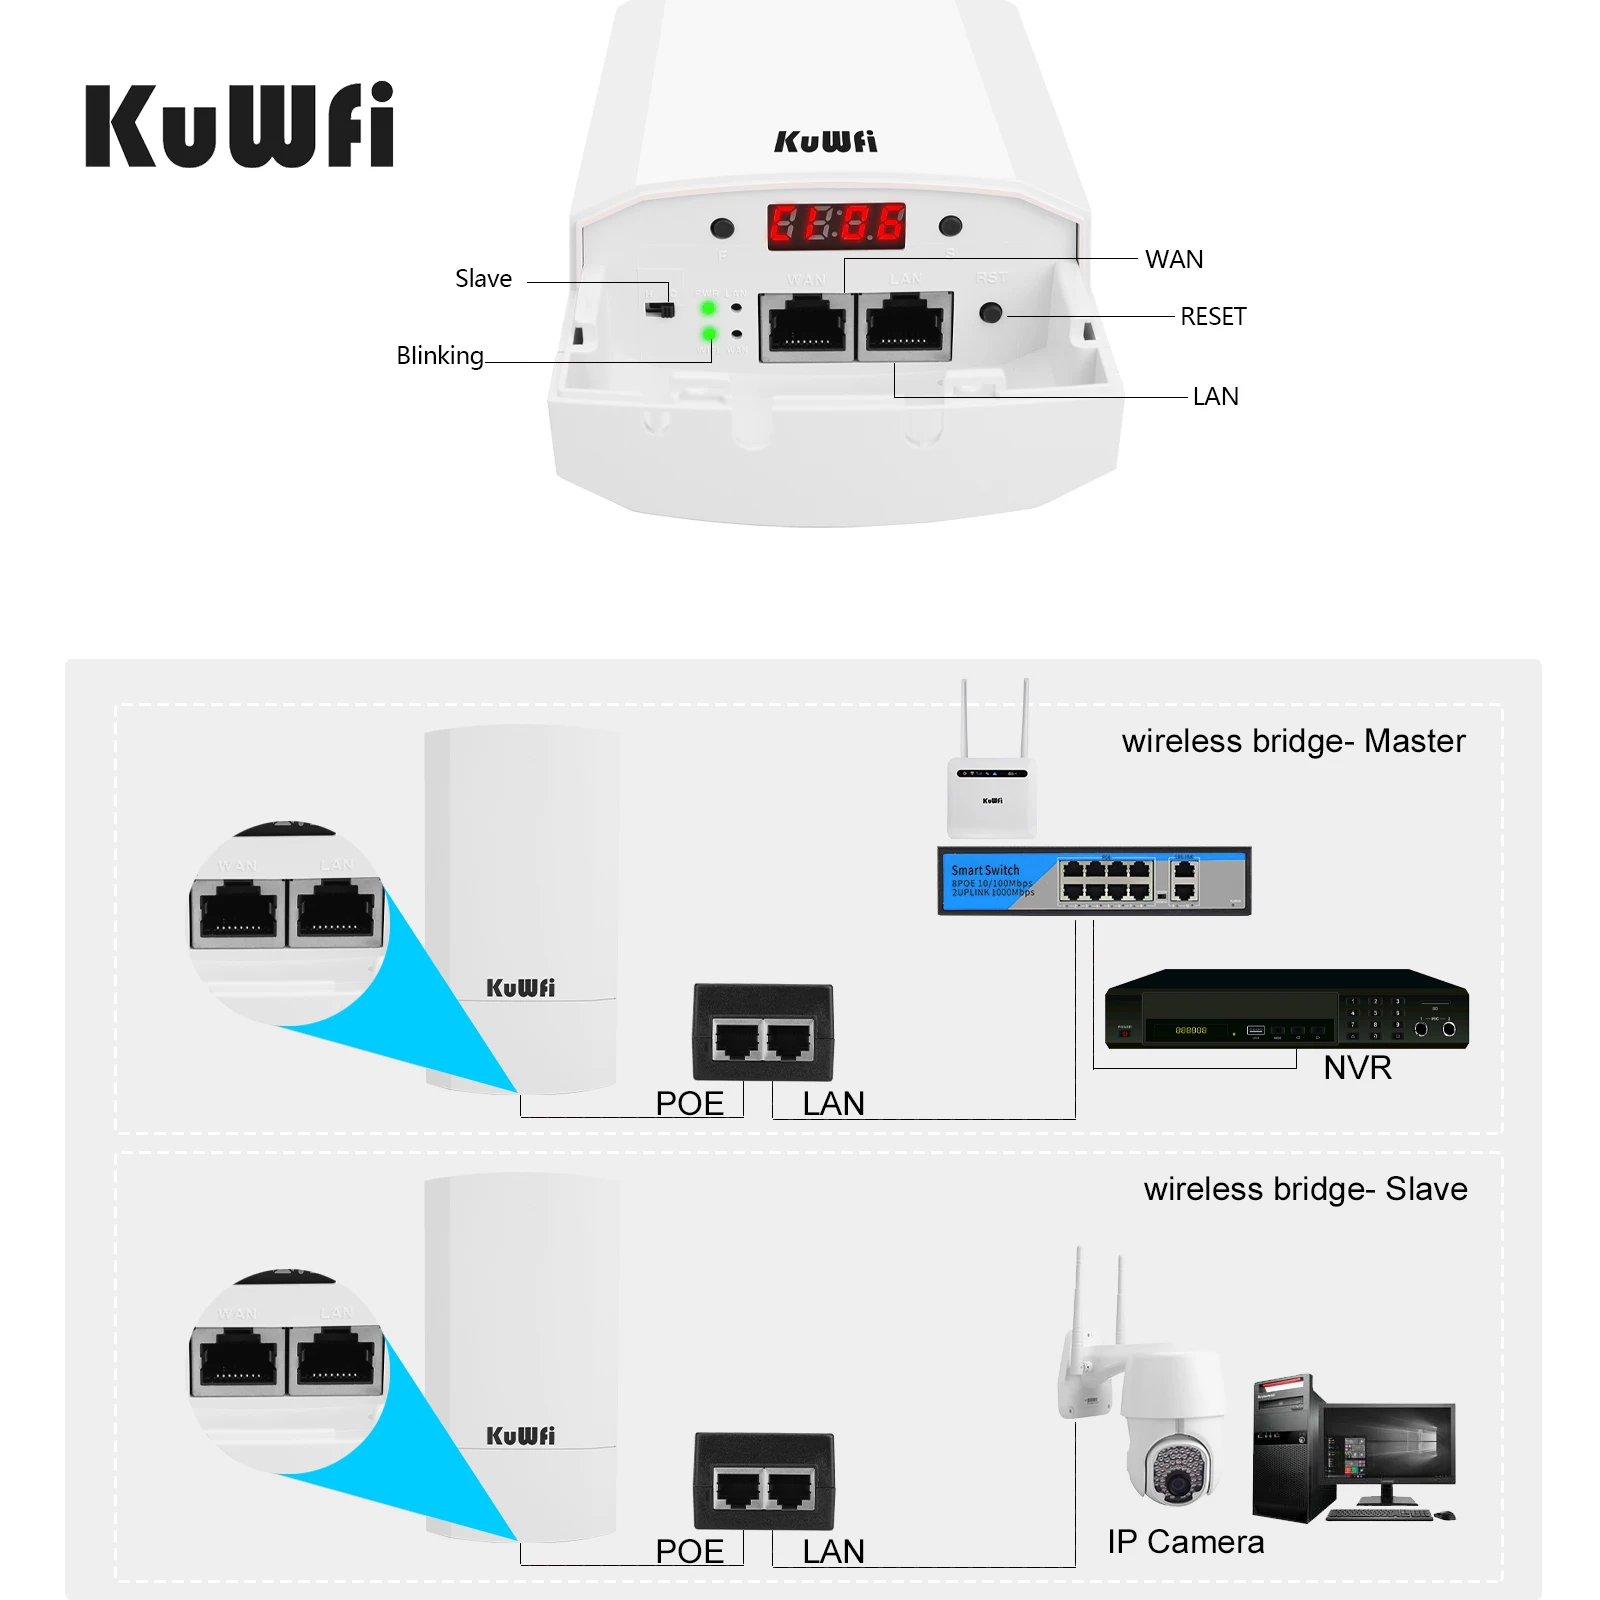 wifi extenders signal booster for home KuWfi Wifi Cầu Router 1KM 300Mbps Không Dây Ngoài & Trong Nhà CPE Router Bộ Cầu Không Dây Wifi repeater wifi modem amplifier